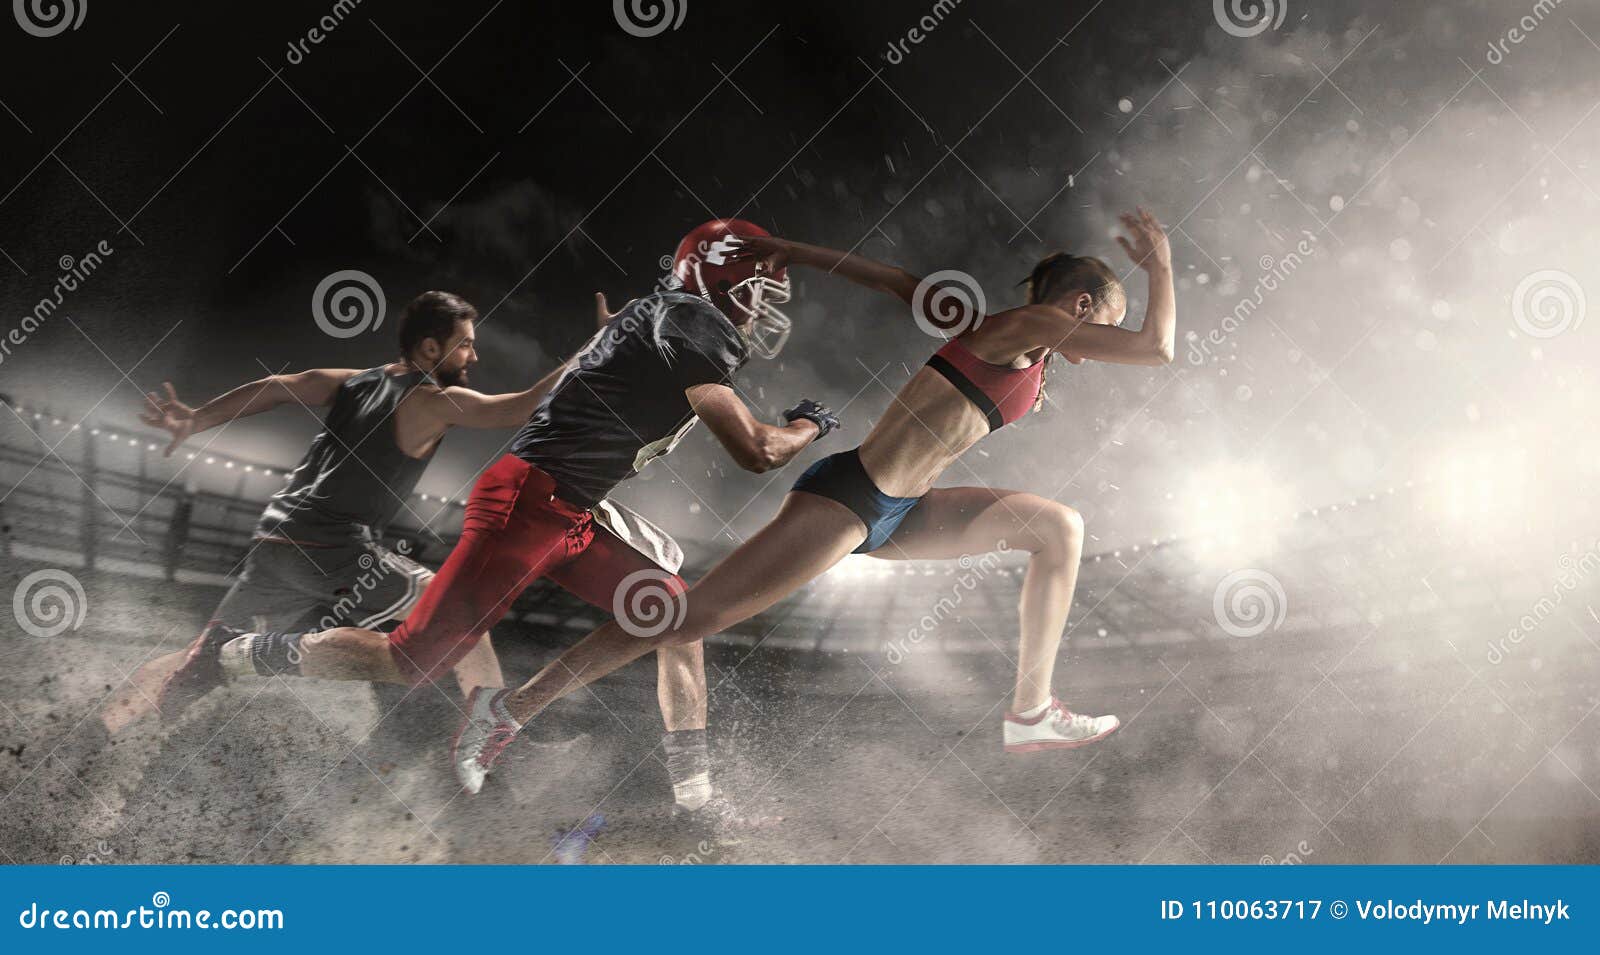 multi sports collage about basketball, american football players and fit running woman